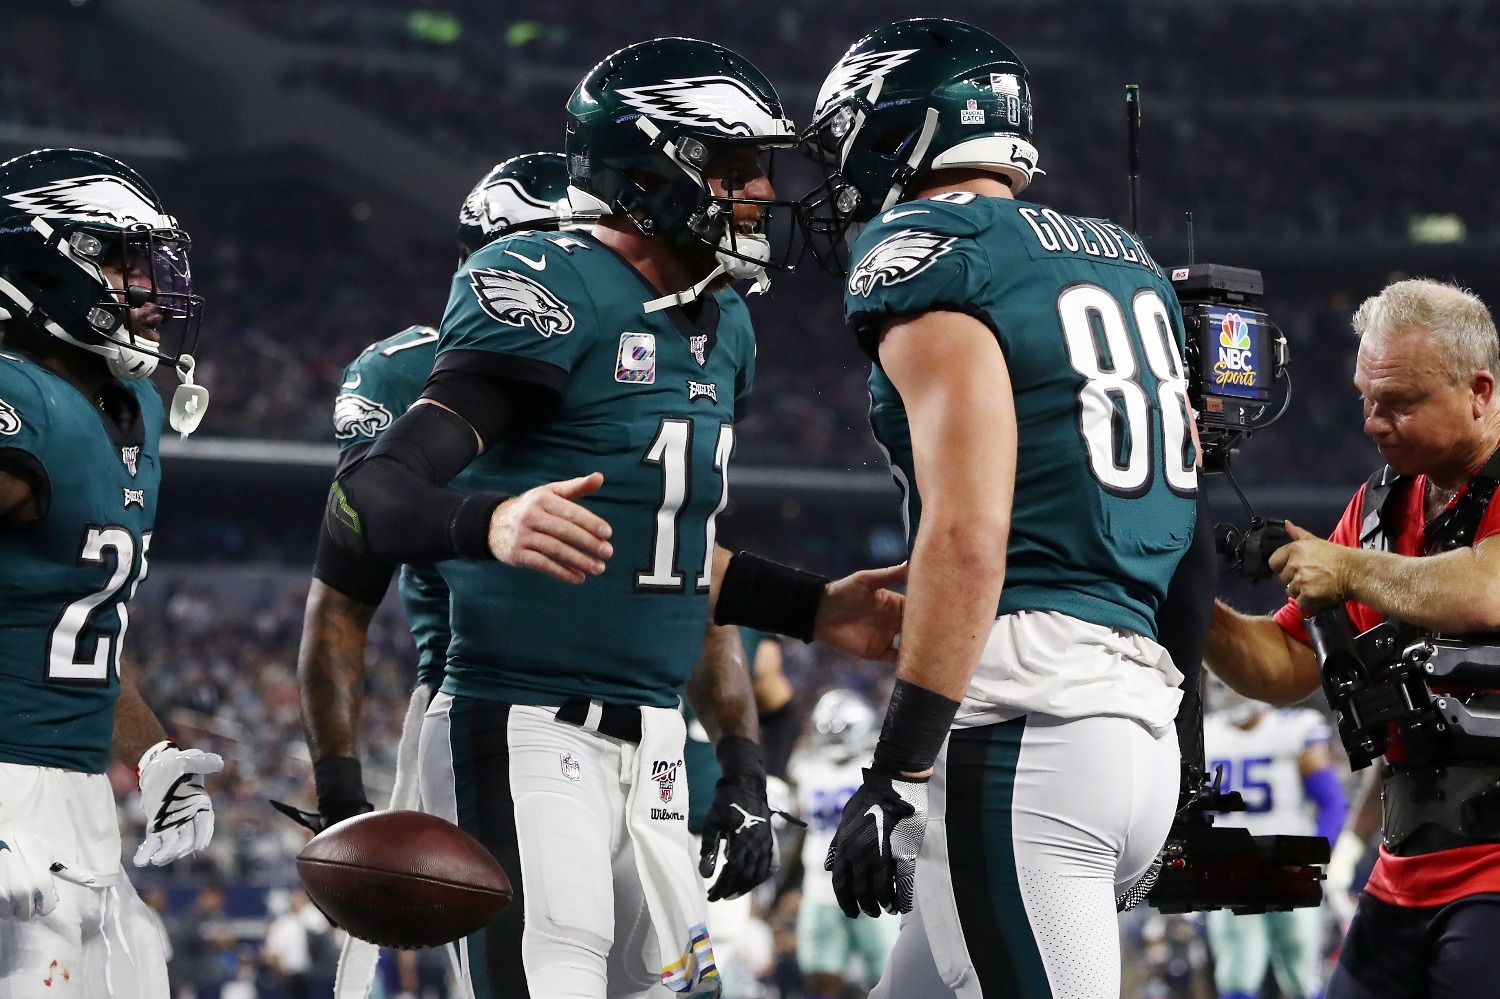 With Dallas Goedert injured, Carson Wentz and the Eagles offense will continue to struggle, which could have a drastic effect on Wentz's career.